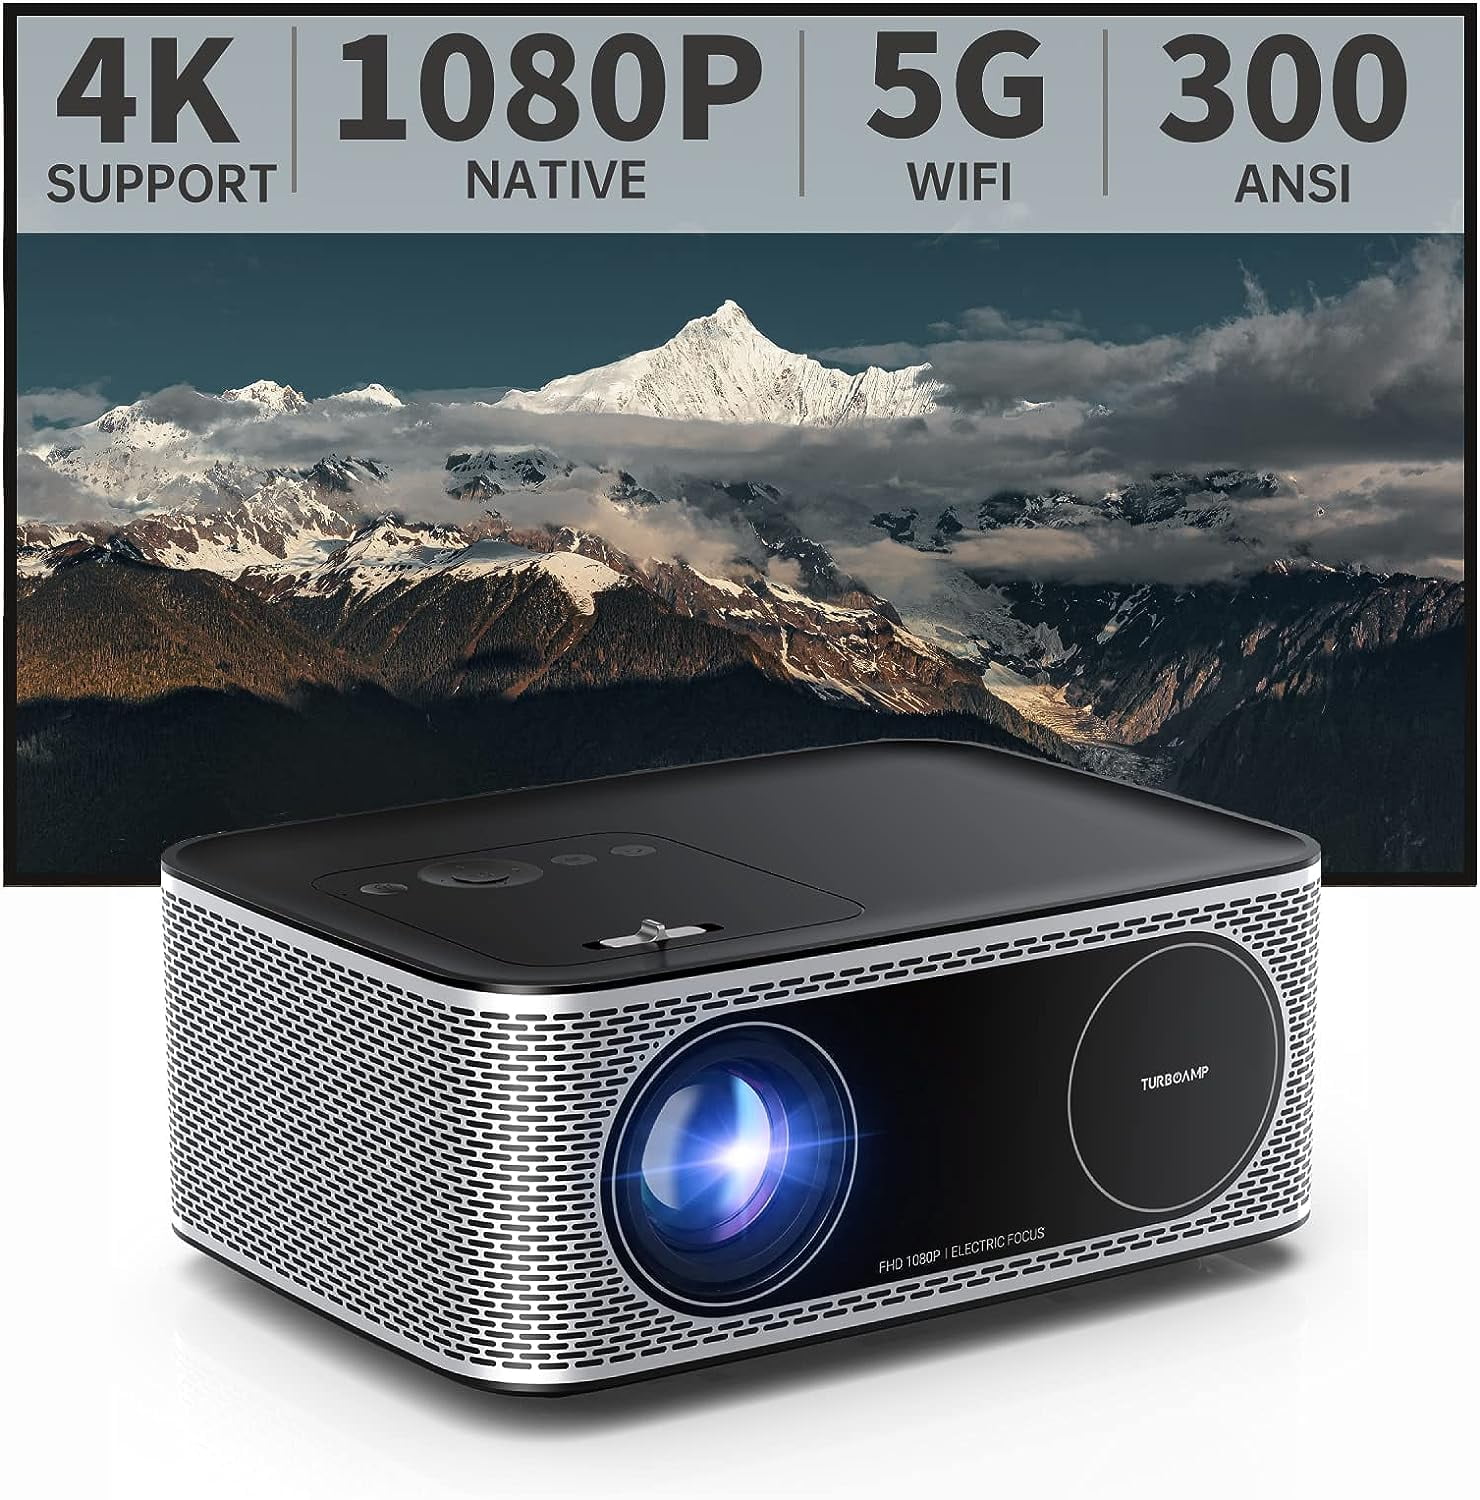 TaoTronics Projector 4K with WiFi and Bluetooth Supported, MiTecHPro 4